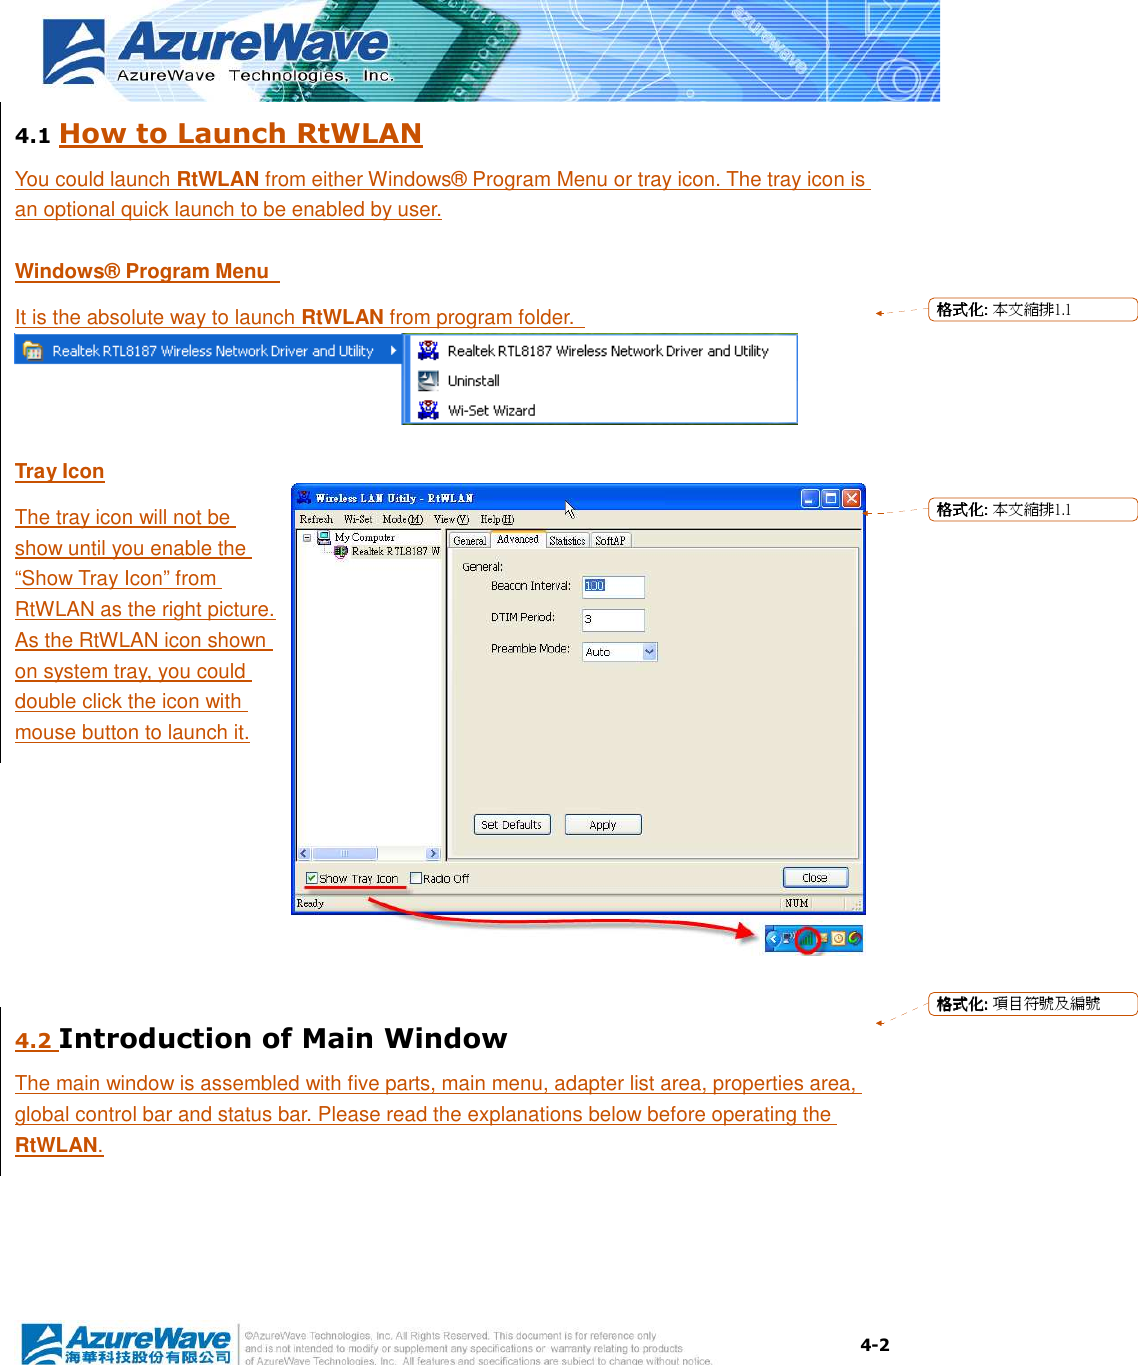  4-2 4.1 How to Launch RtWLAN You could launch RtWLAN from either Windows® Program Menu or tray icon. The tray icon is an optional quick launch to be enabled by user. Windows® Program Menu   It is the absolute way to launch RtWLAN from program folder.  Tray Icon The tray icon will not be show until you enable the “Show Tray Icon” from RtWLAN as the right picture. As the RtWLAN icon shown on system tray, you could double click the icon with mouse button to launch it.  4.2 Introduction of Main Window The main window is assembled with five parts, main menu, adapter list area, properties area, global control bar and status bar. Please read the explanations below before operating the RtWLAN. 格格格格式化式化式化式化:::: 本文縮排1.1格格格格式化式化式化式化:::: 本文縮排1.1格格格格式化式化式化式化:::: 項目符號及編號